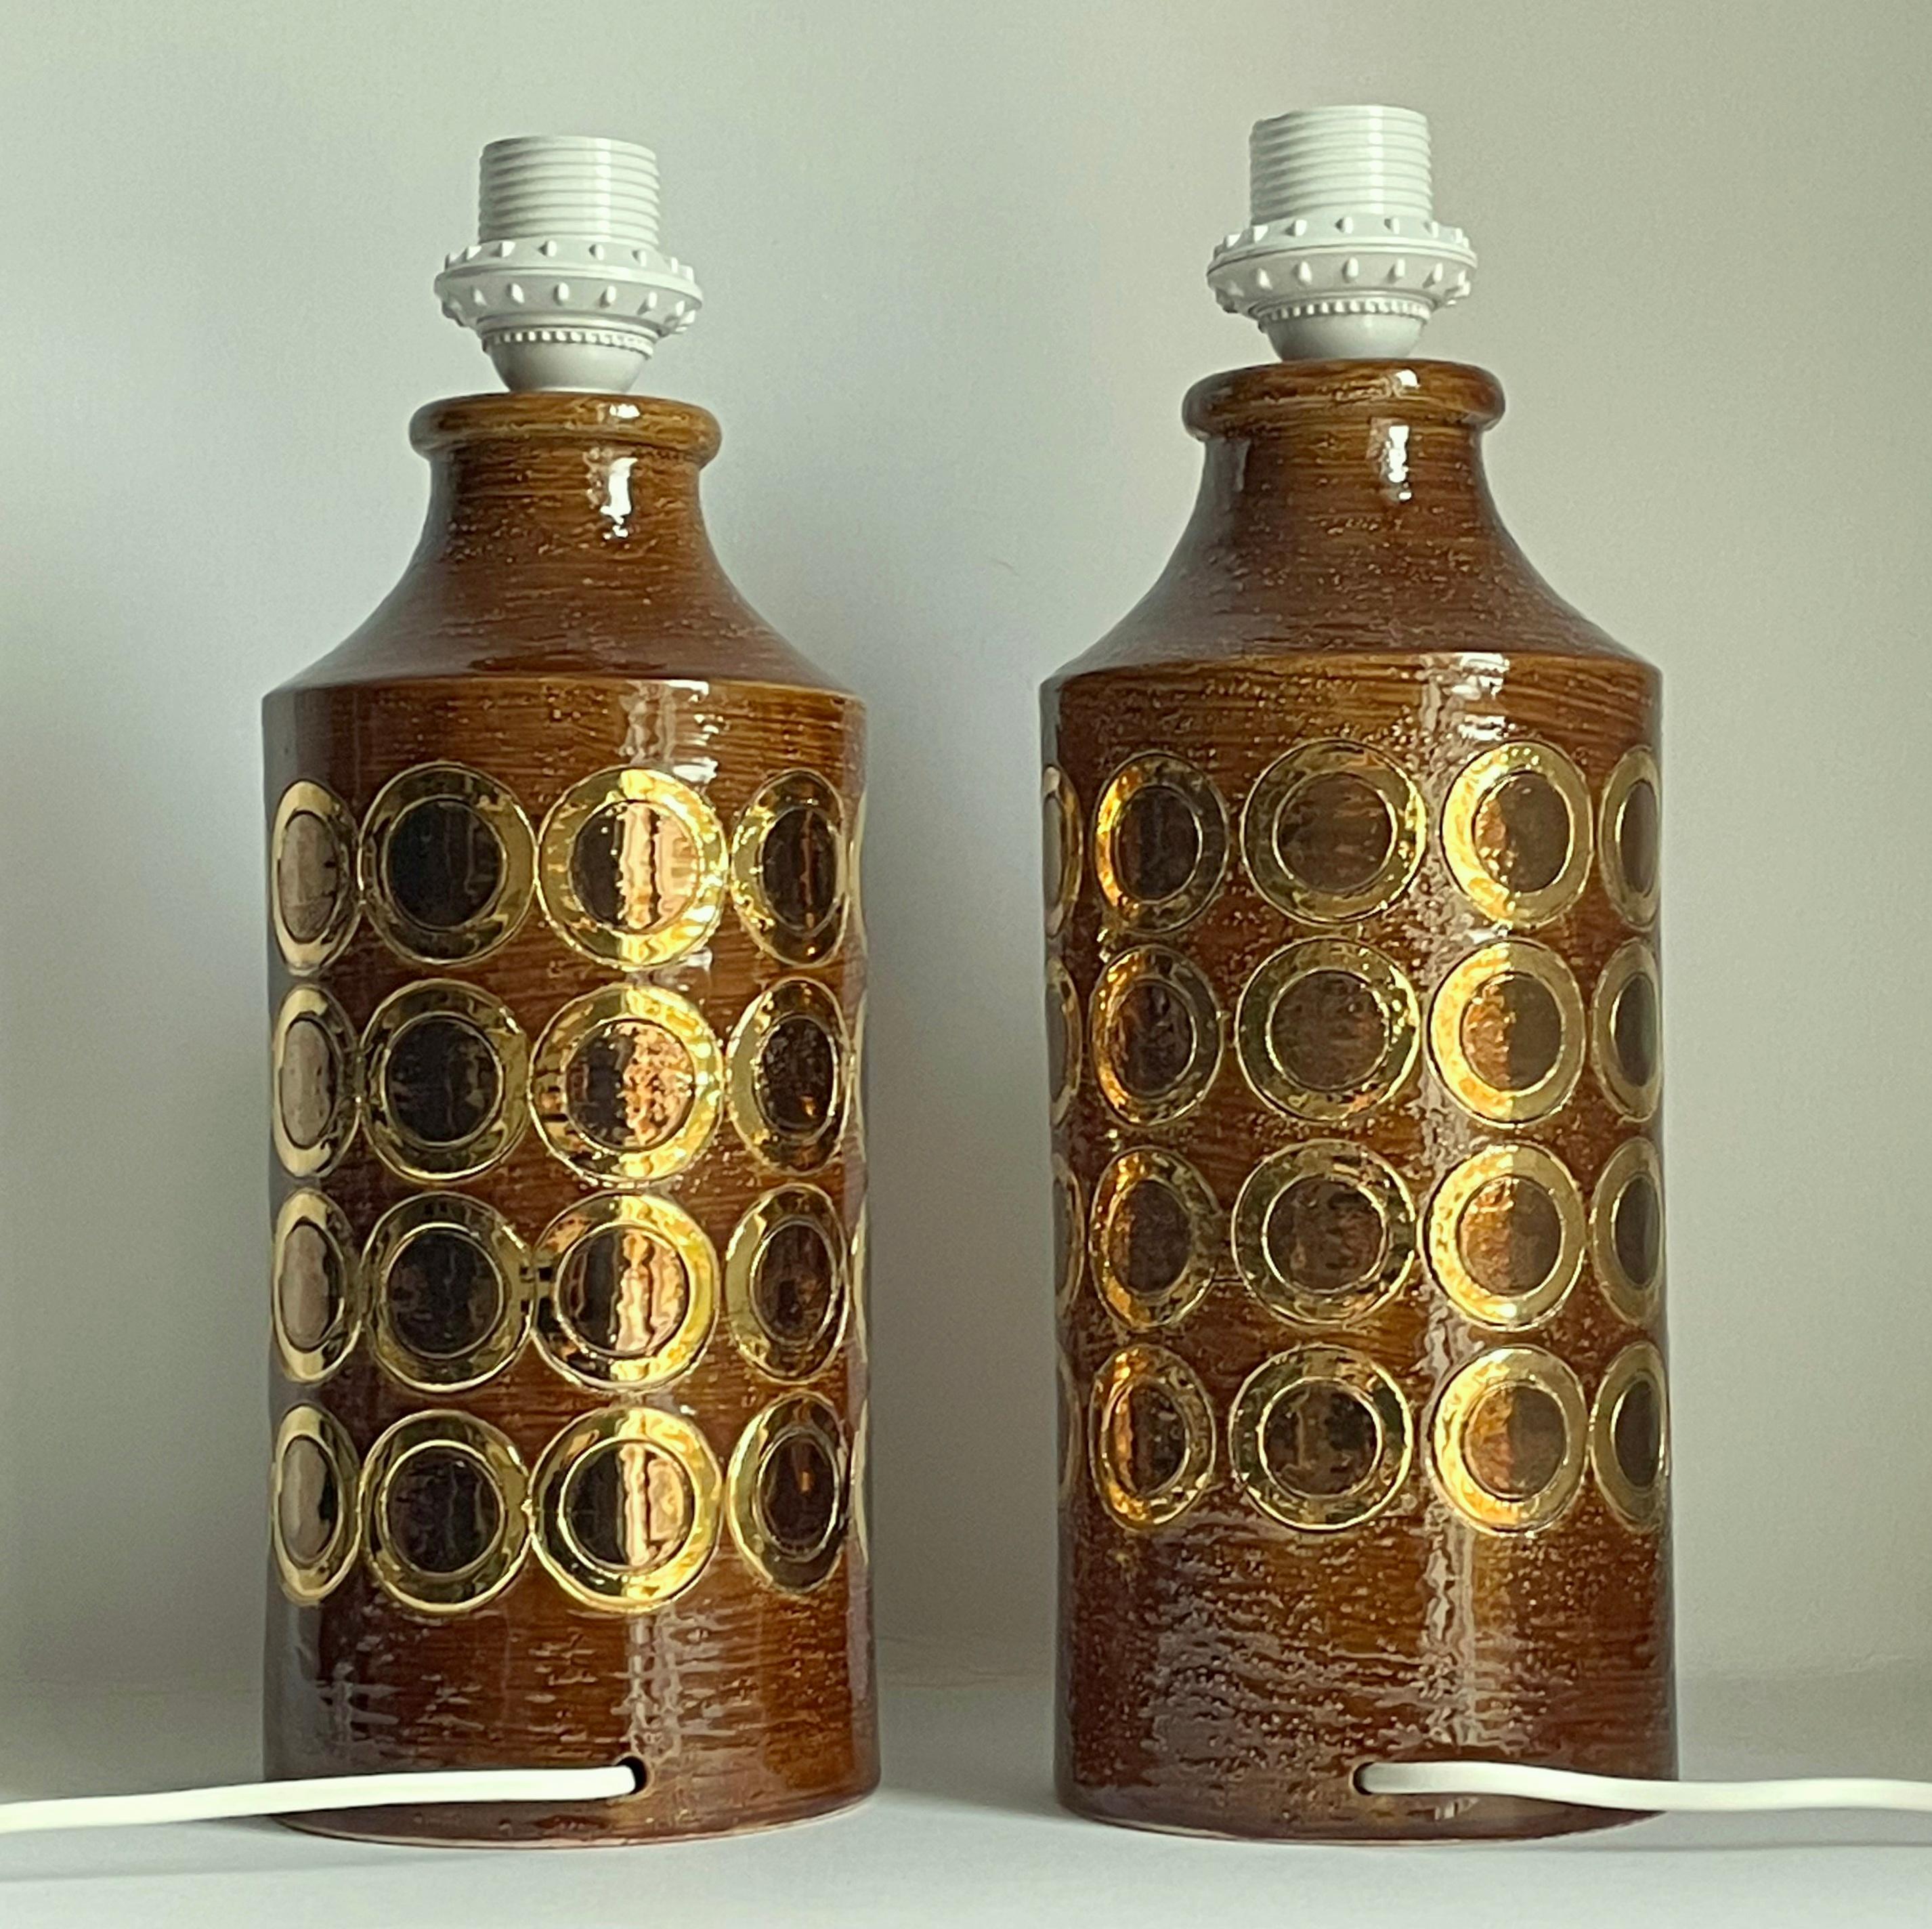 Pair of Bitossi Table Lamps by Aldo Londi, Brown & Gold Glazed Ceramic, 1970s In Good Condition For Sale In Stockholm, SE